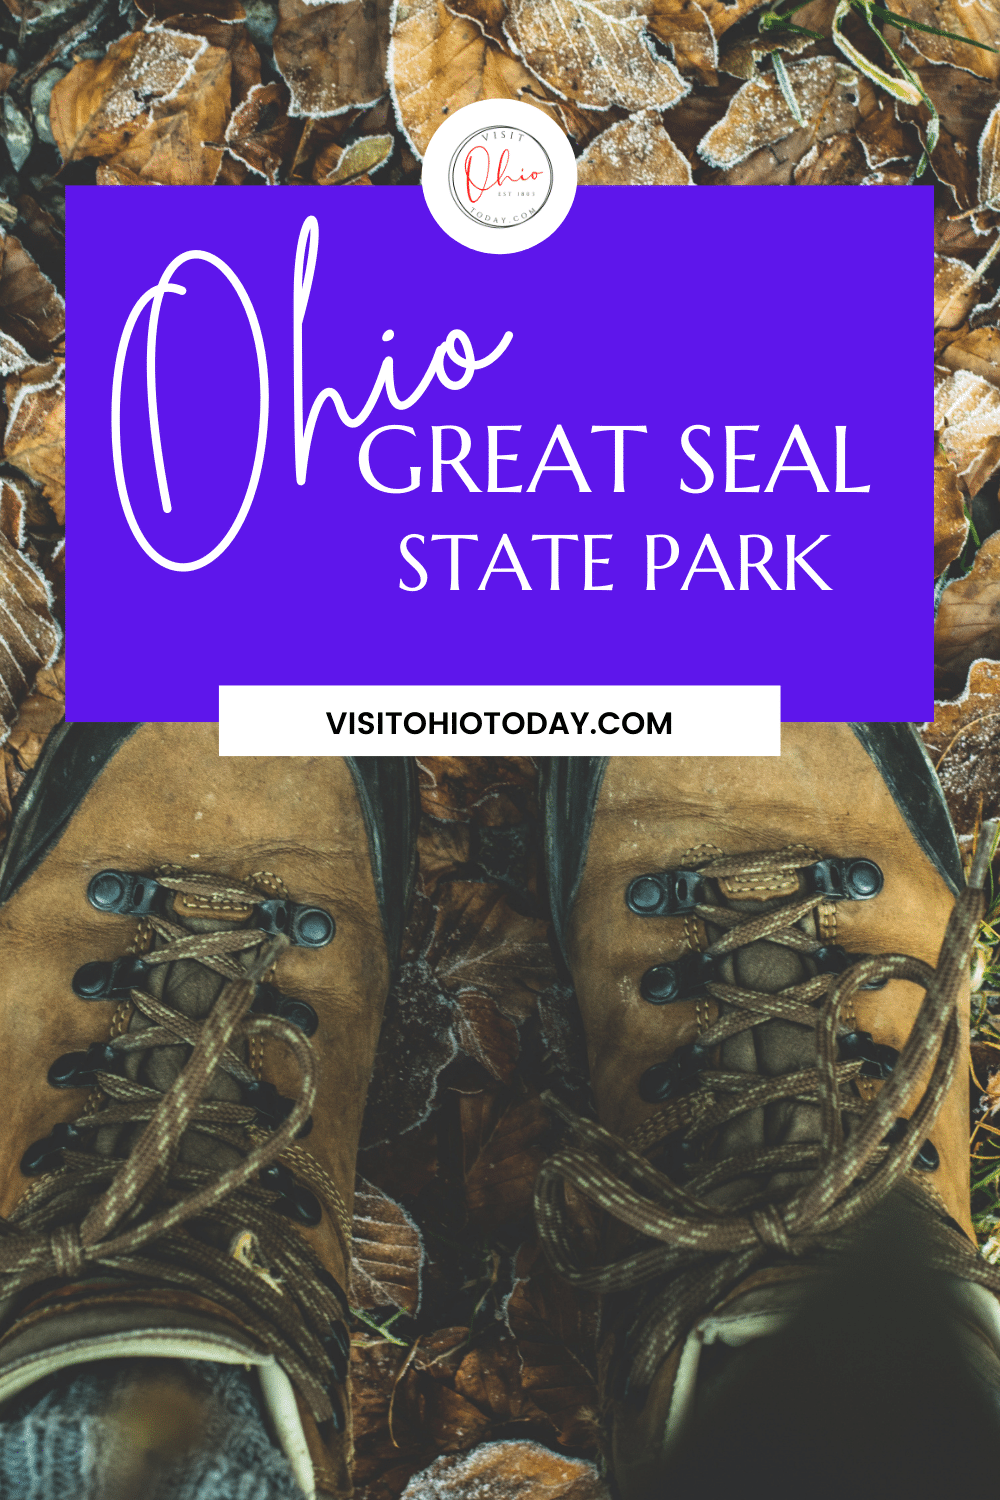 brown hiking shoes (2 of them) on top of brown gravel and ground. Purple rectangle with words in white: ohio great seal state park visitohiotoday.com